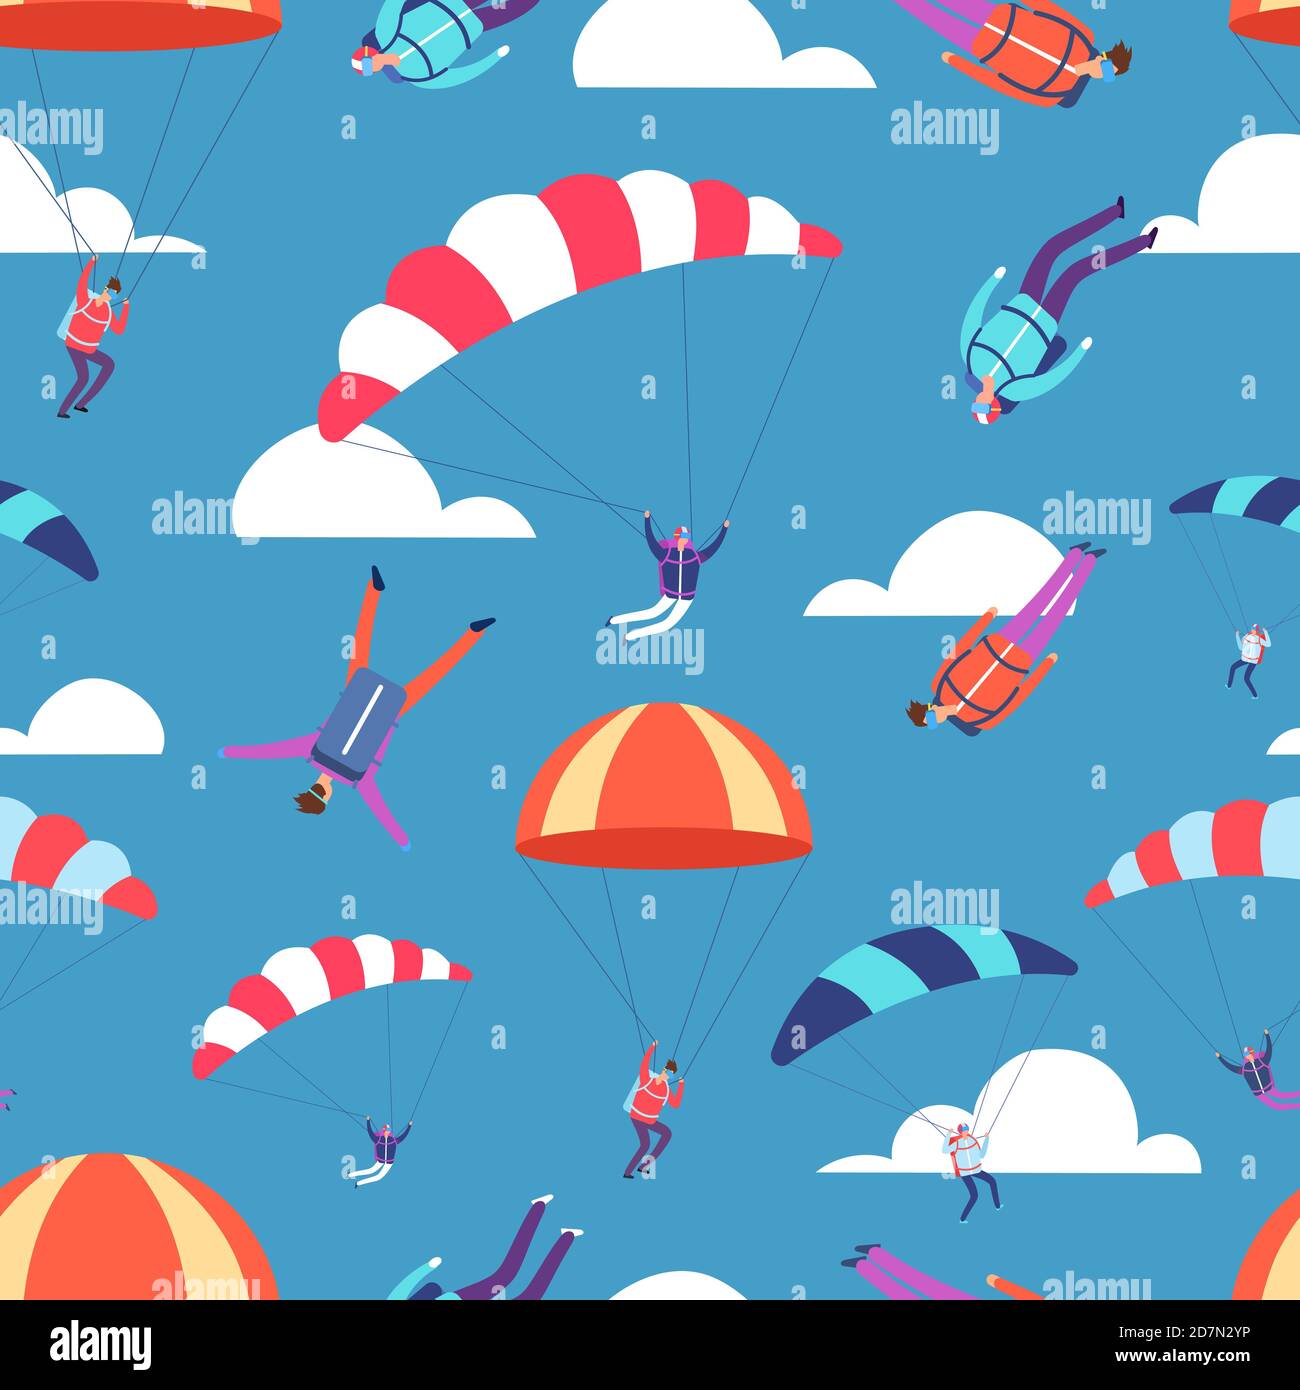 Skydivers, jumpers in sky vector seamless pattern. Illustration of skydiving and parachuting, paragliding hobby Stock Vector